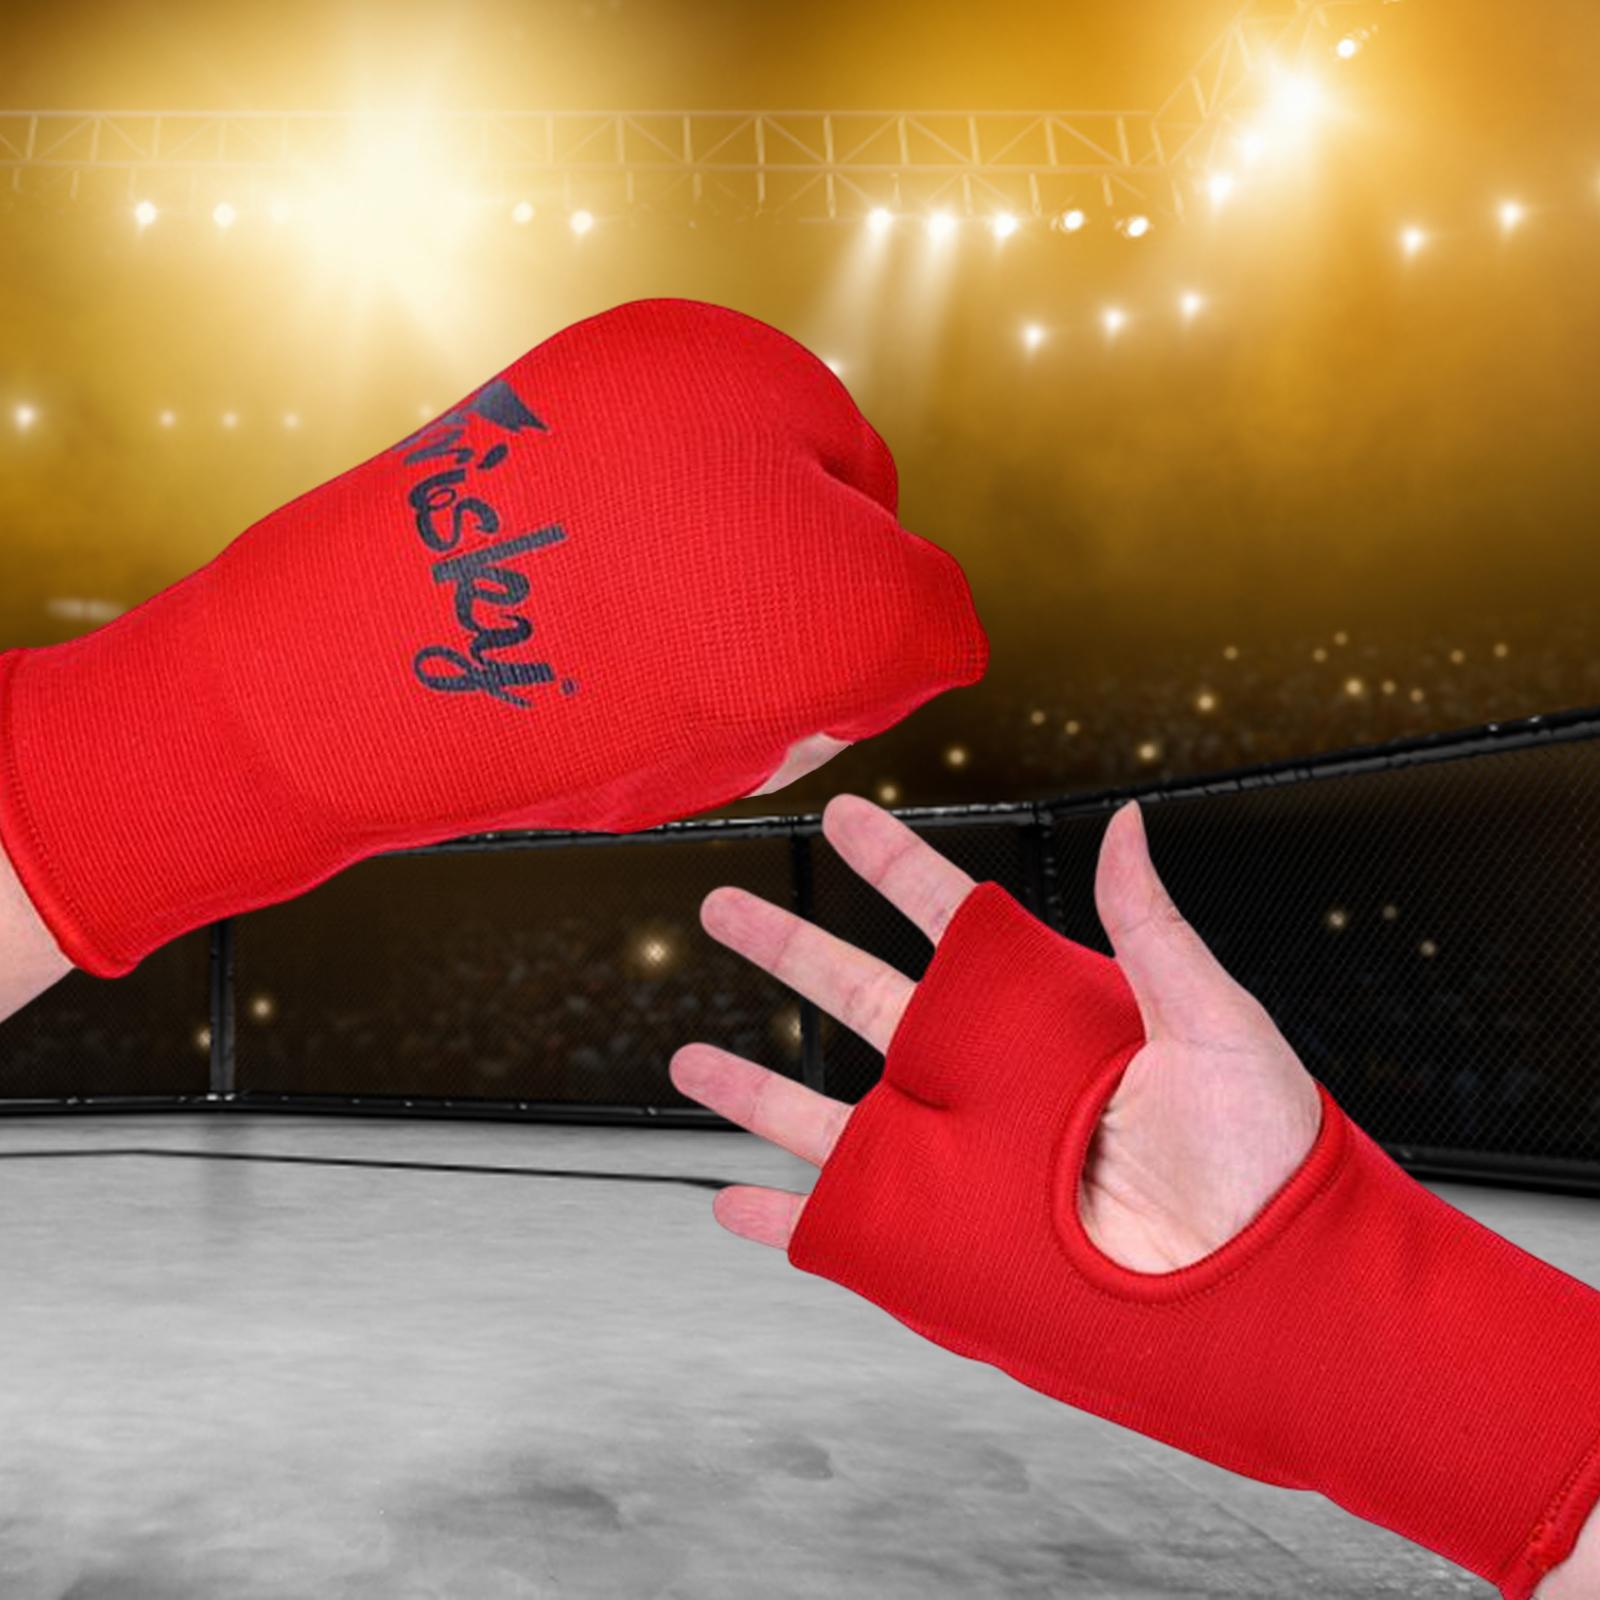 Elastic Hand Wraps Comfortable Inner Gloves for Boxing for Martial Arts Red Small